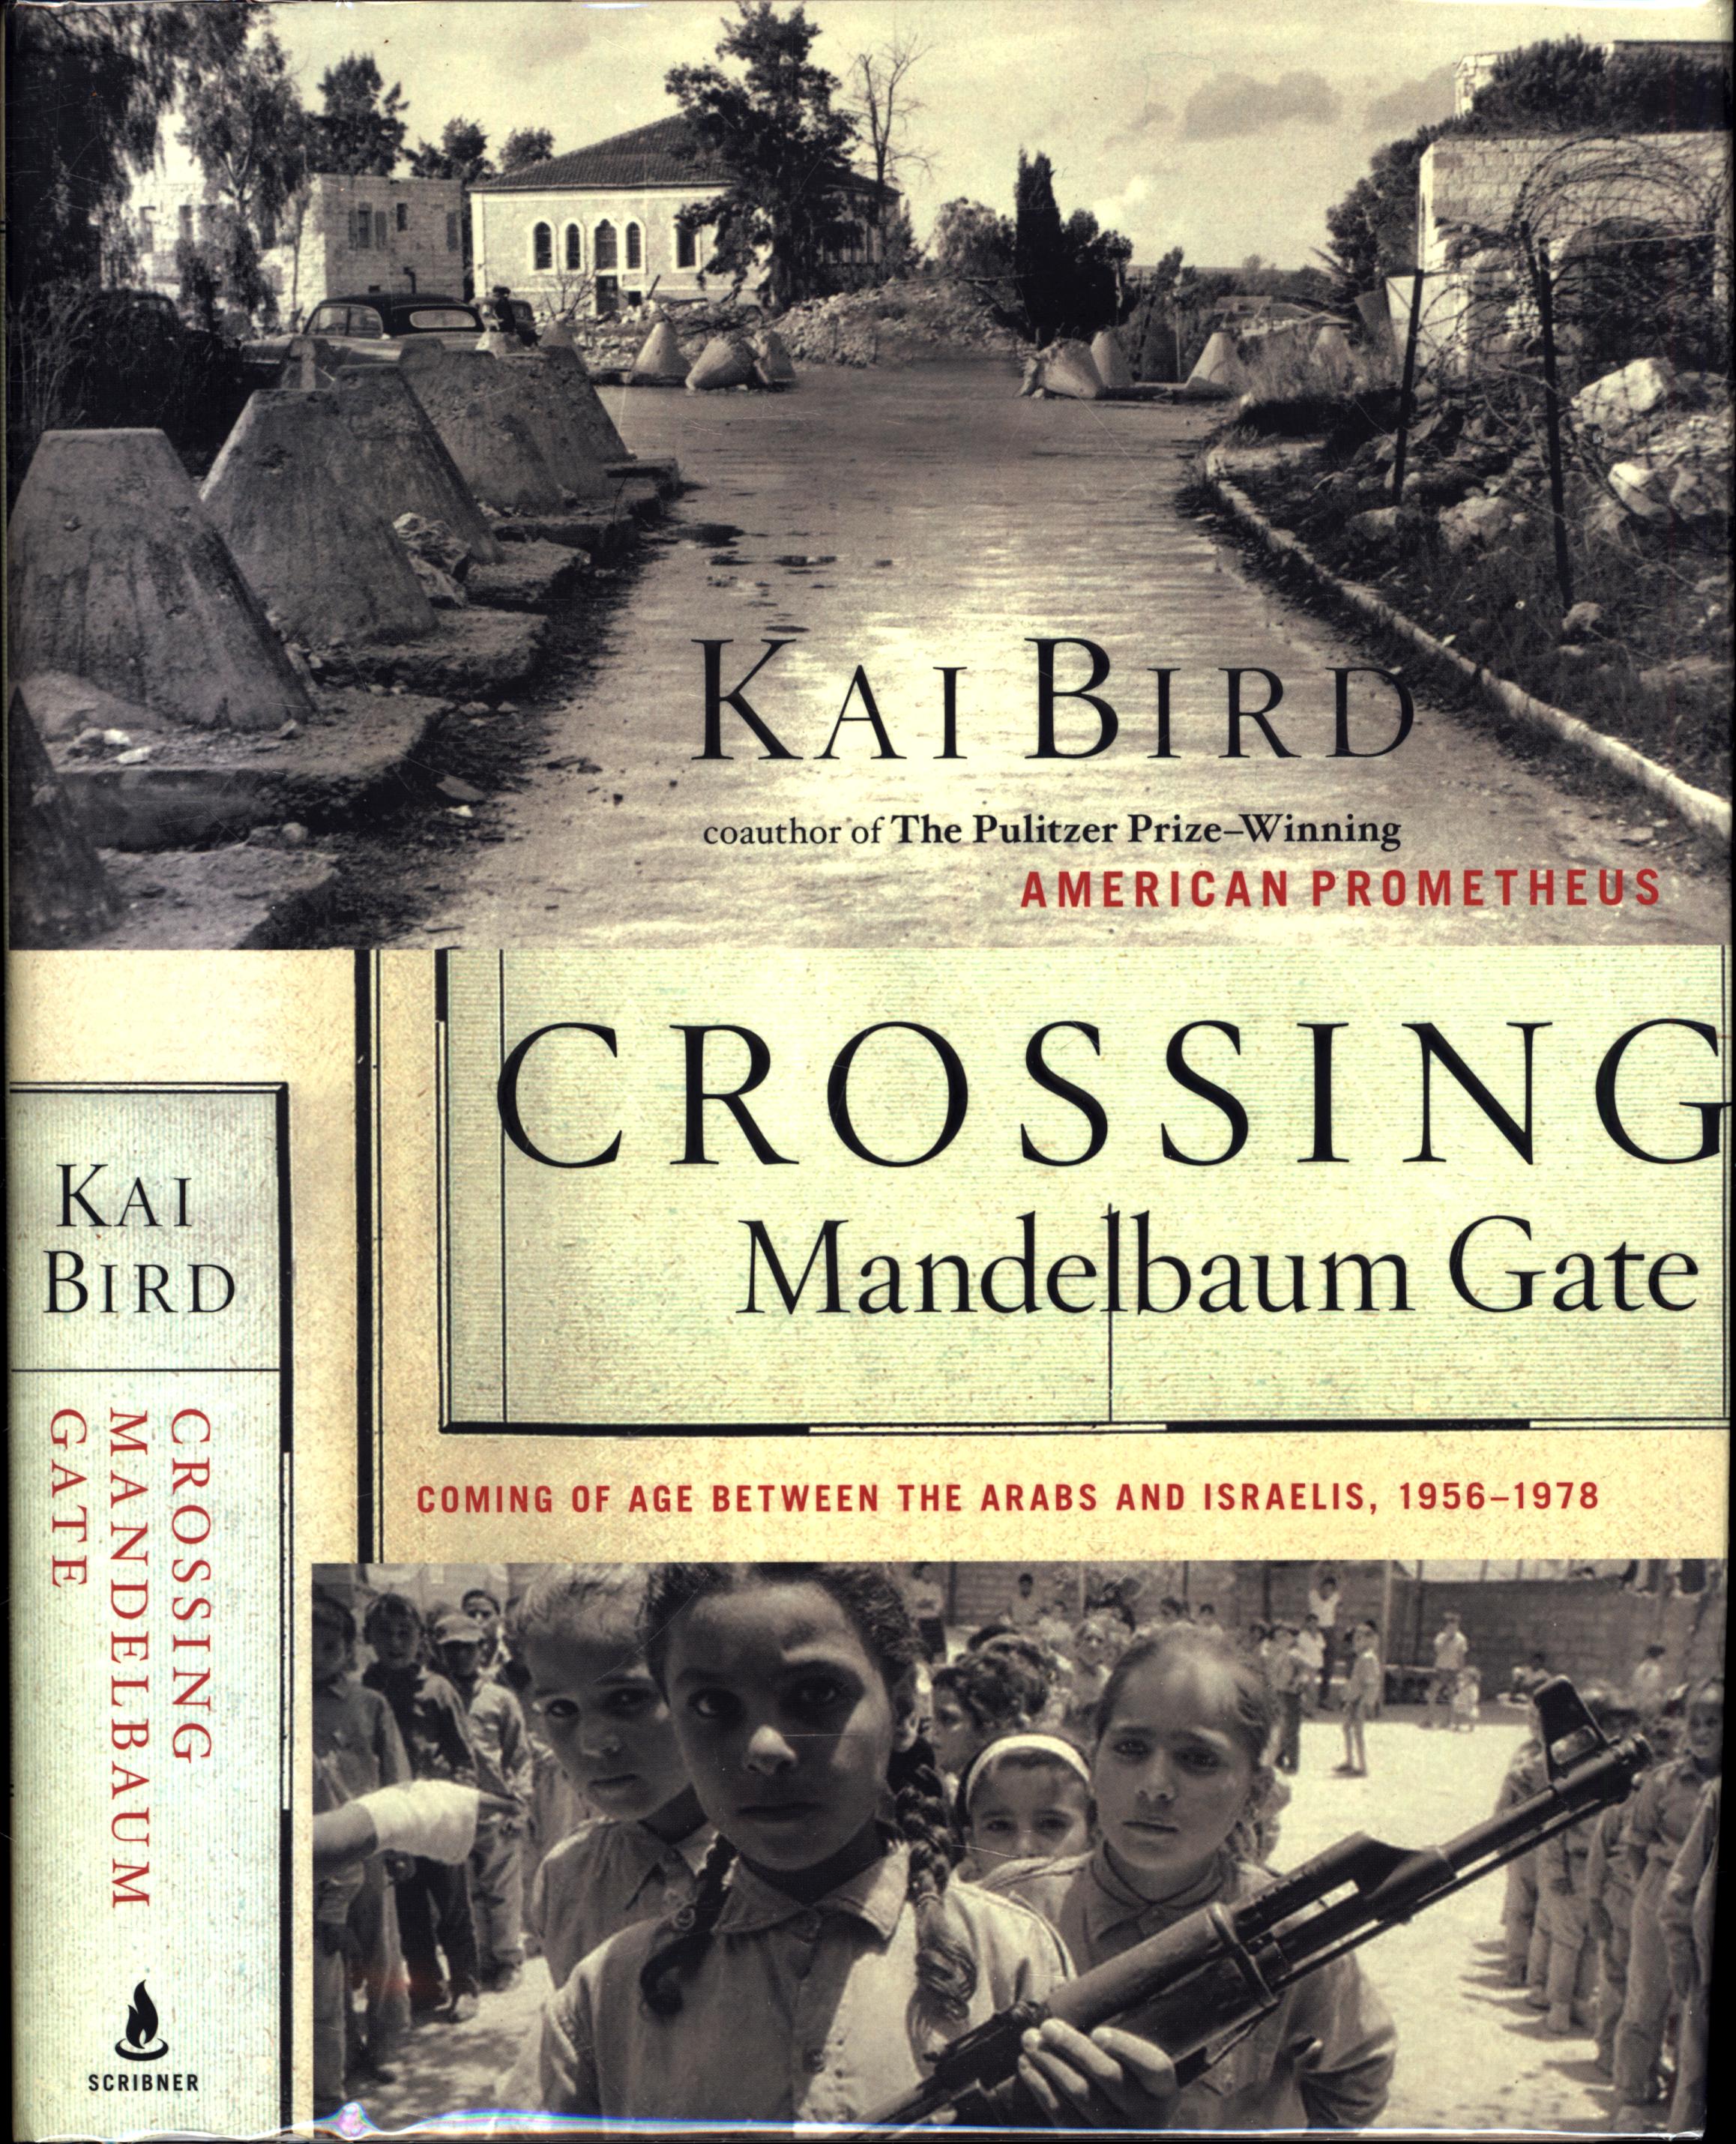 Crossing Mandelbaum Gate / Coming of Age Between the Arabs and Israelis, 1956-1978 (INSCRIBED TO PALESTINIAN TERRORIST ABU DAOUD) - Bird, Kai / coauthor of The Pulitzer-Prize Winning 